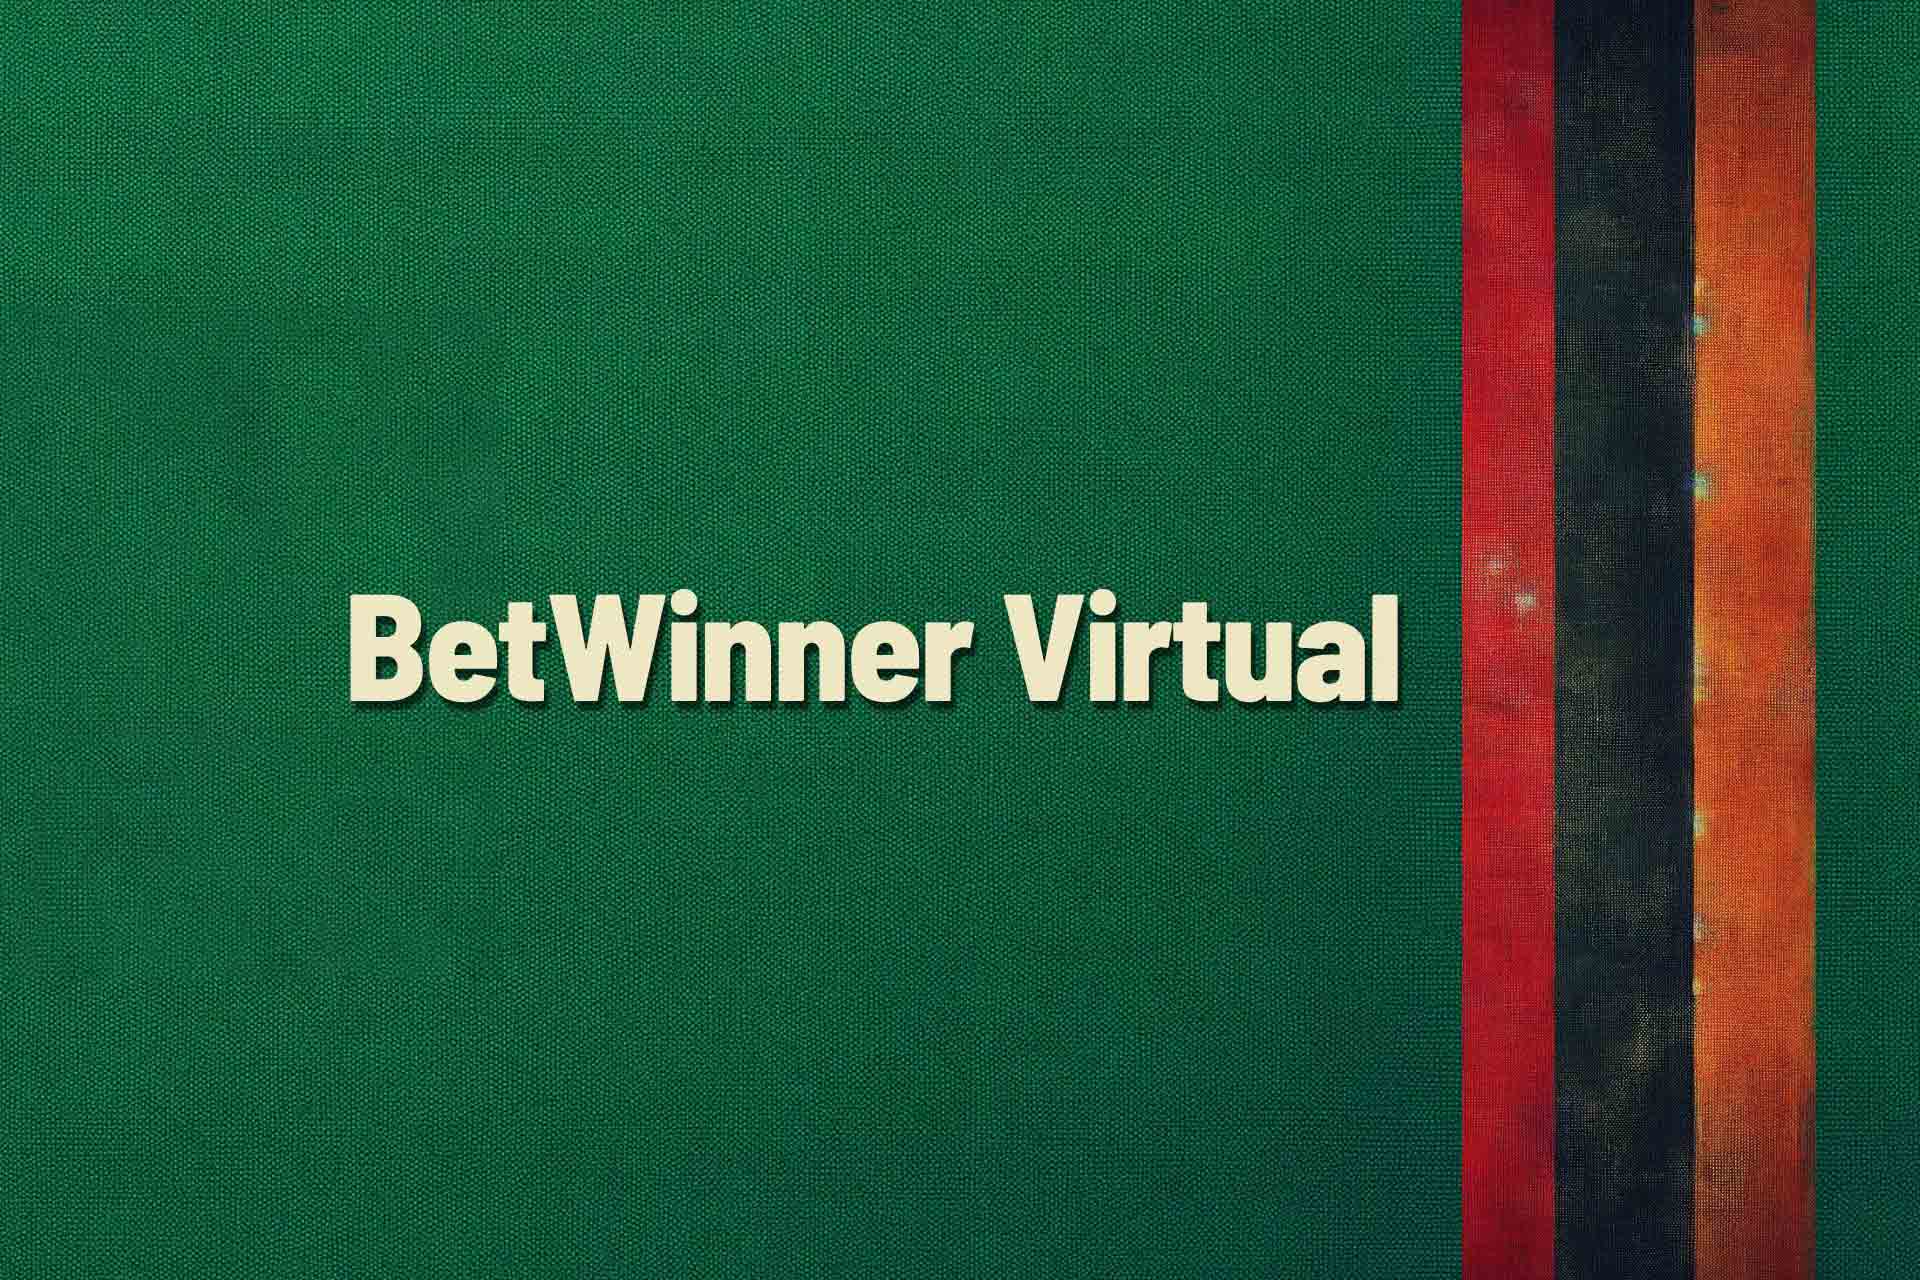 I Don't Want To Spend This Much Time On betwinner. How About You?